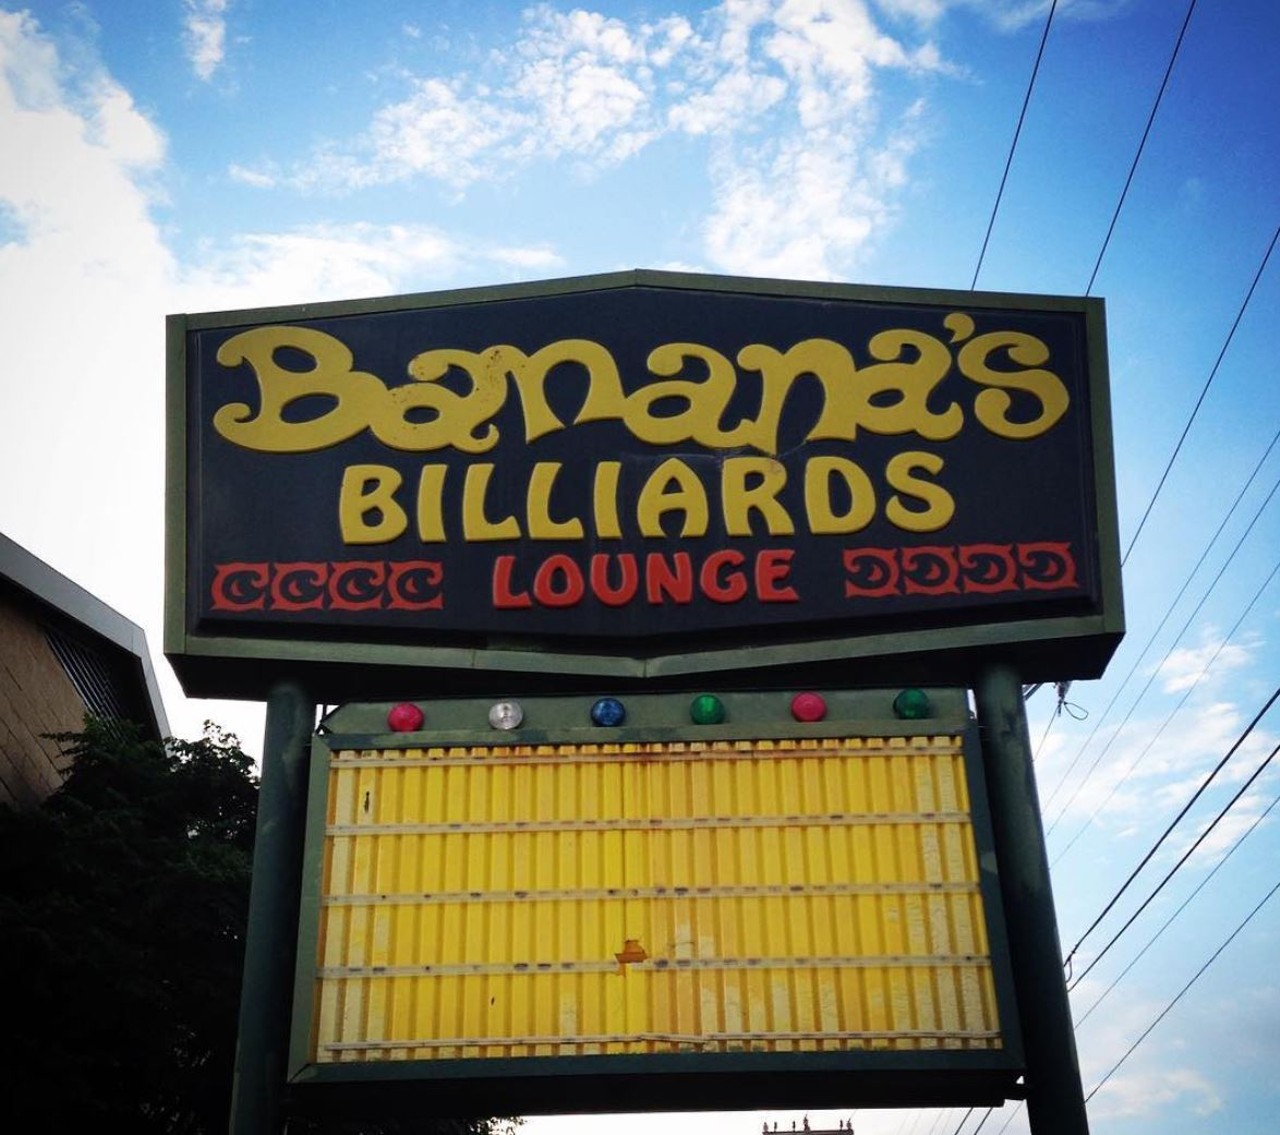 Banana’s Billiards
2003 San Pedro Ave, (210) 226-2626, facebook.com/BananasBilliards 
Banana’s Billiards reopened with new ownership this February. The space received a much needed makeover, but will keep focusing on cold beer and great pool.
Photo via Instagram / _corpser_